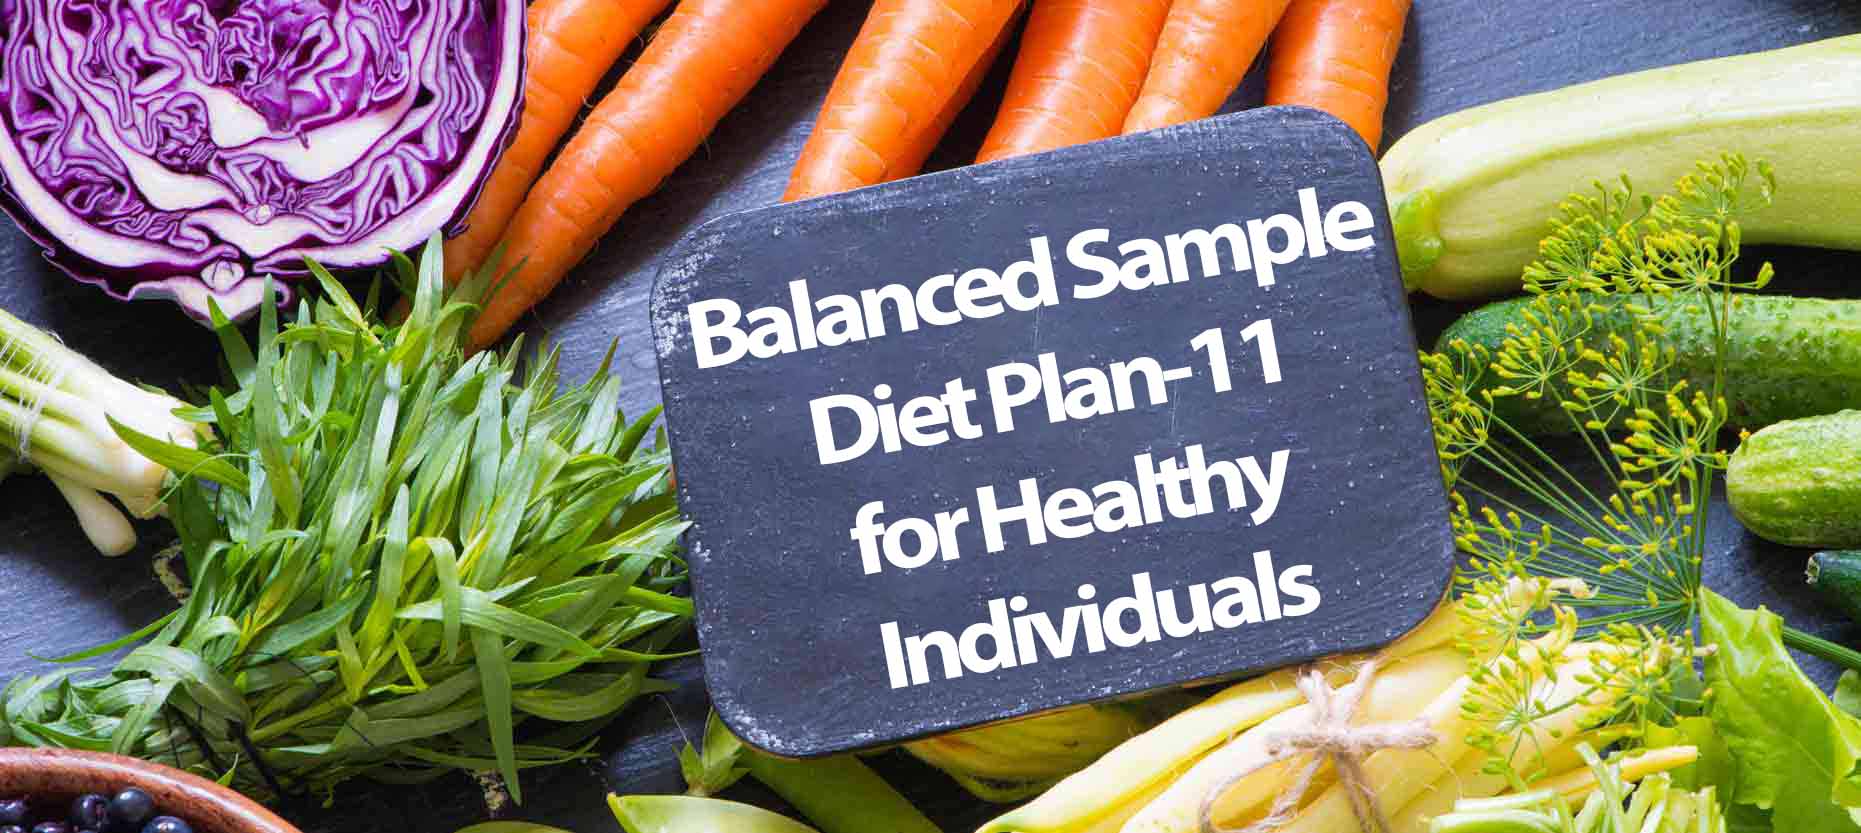 Balanced Sample Diet Plan-11 for Healthy Individuals